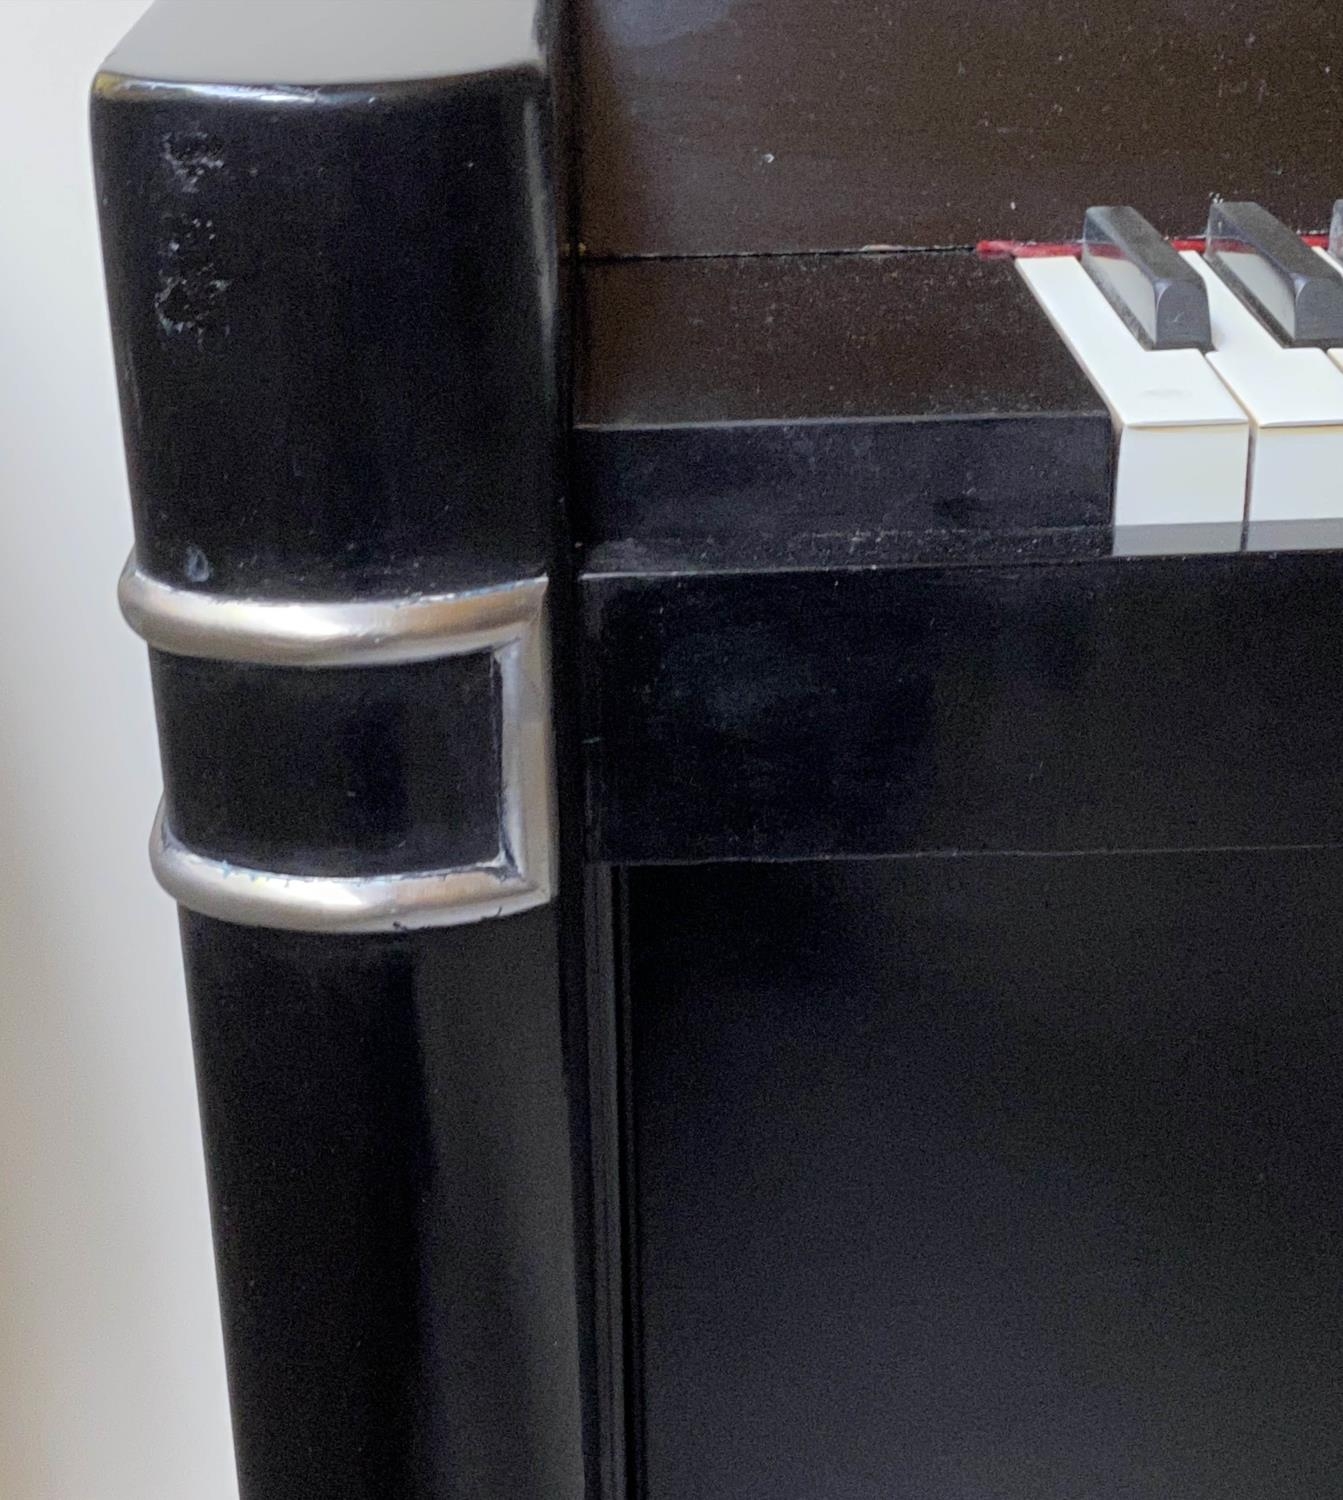 EAVESTAFF MINI PIANO, Art Deco black lacquered and chrome mounted case, registration No. 12200, - Image 10 of 11